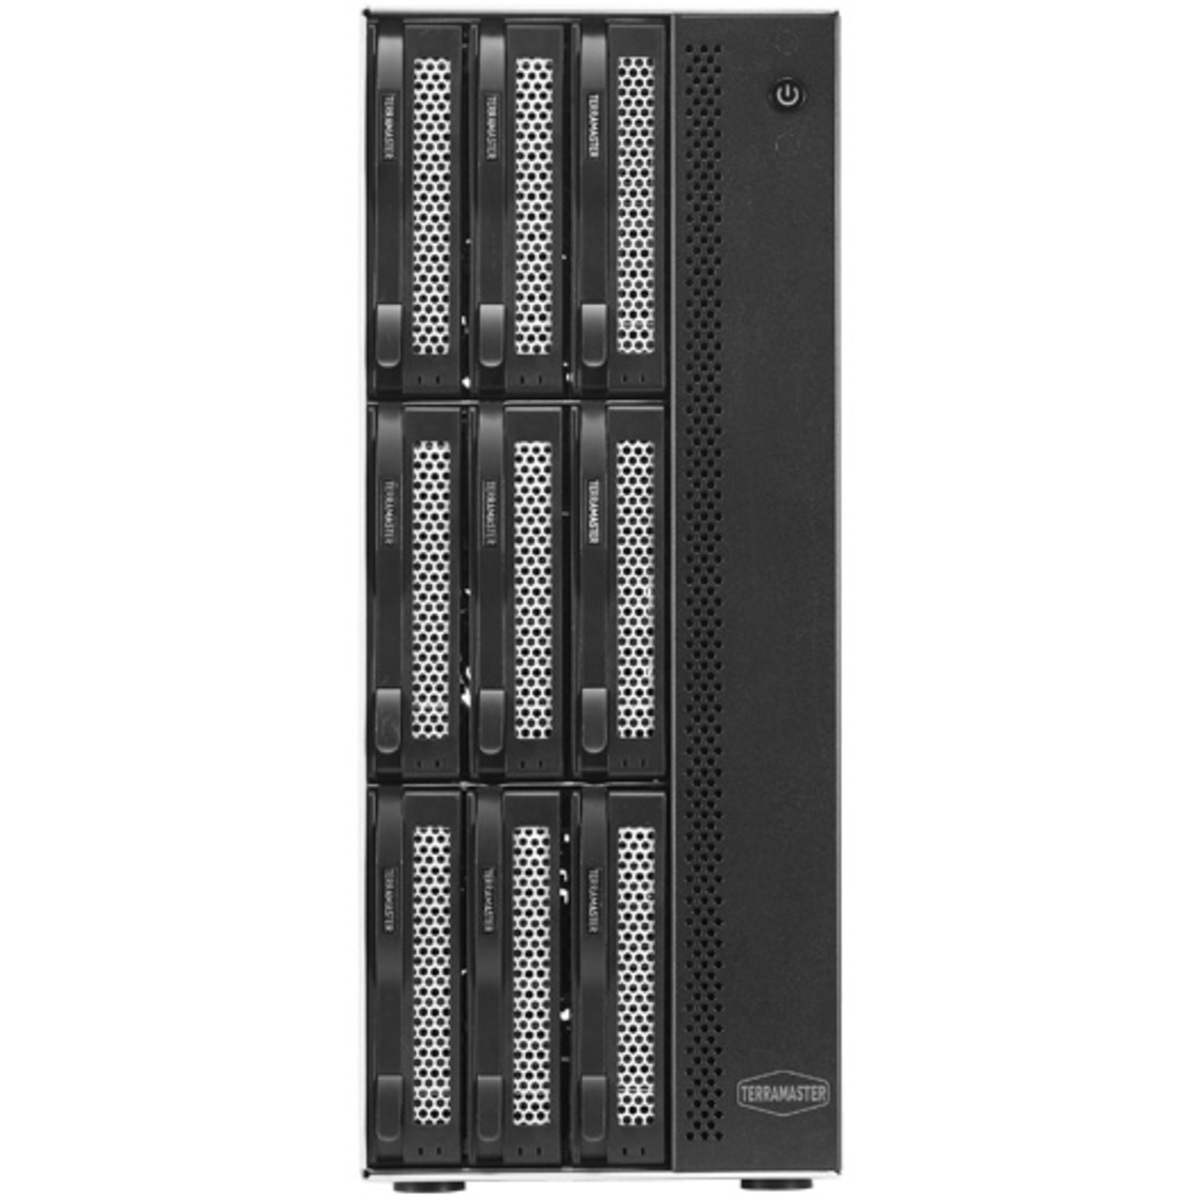 TerraMaster T9-423 90tb 9-Bay Desktop Multimedia / Power User / Business NAS - Network Attached Storage Device 9x10tb Western Digital Red Pro WD102KFBX 3.5 7200rpm SATA 6Gb/s HDD NAS Class Drives Installed - Burn-In Tested T9-423